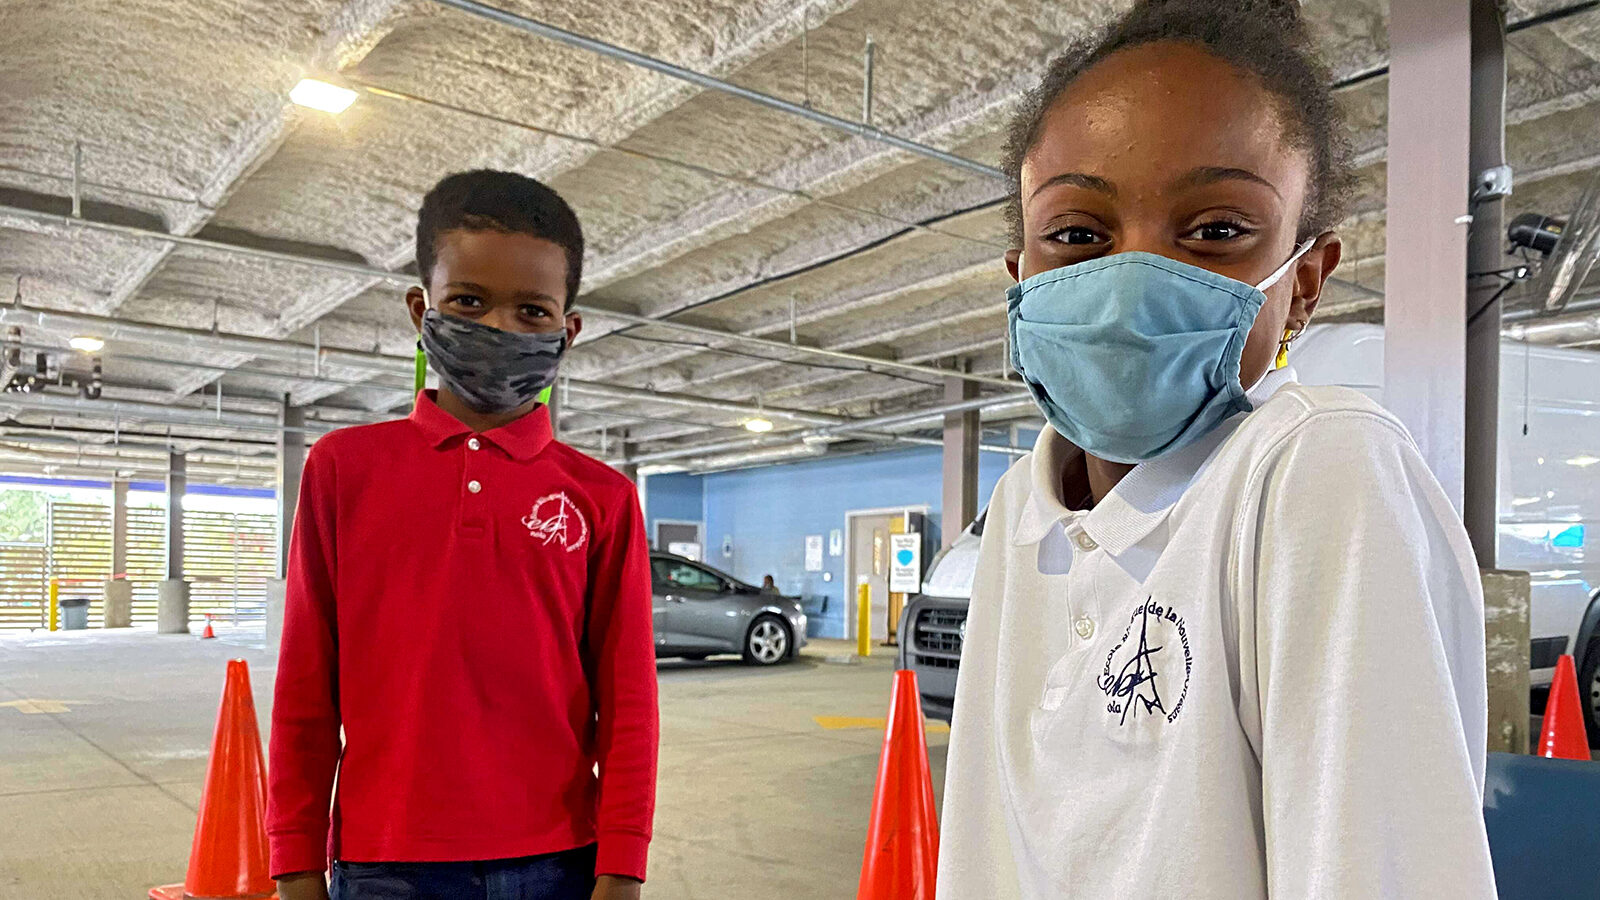 Langston, 8, stands next to his sister Alexia, 11, as they arrive to New Orleans' Crescent Care to receive their COVID-19 vaccine shot.